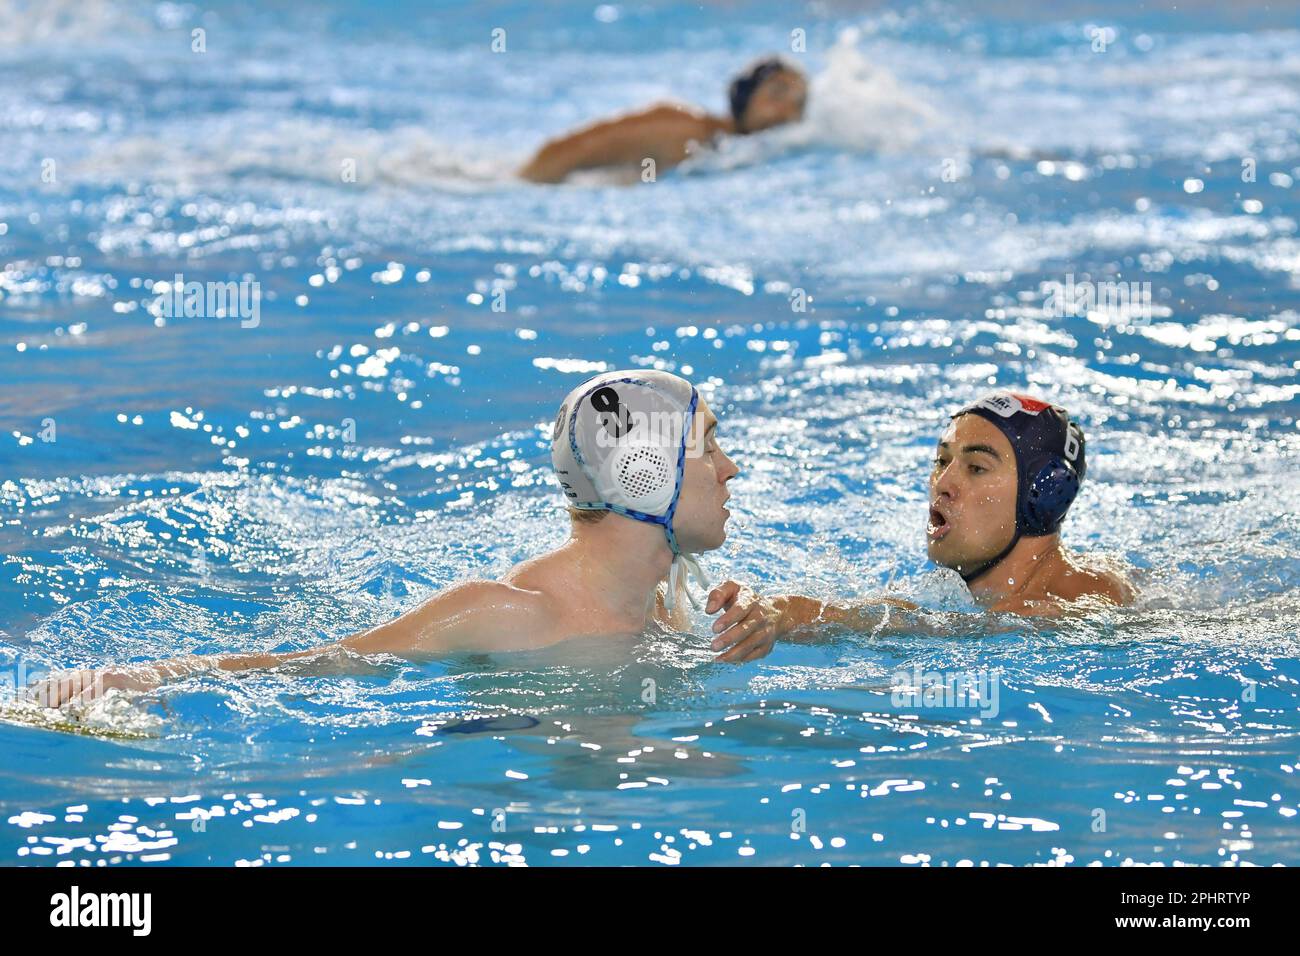 Trieste, Italy. 29th Mar, 2023. Michele Mezzarobba (Pallanuoto Trieste) vs Jpnathan Cooper (Telimar Palermo) during Pallanuoto Trieste vs Telimar, Waterpolo Italian Serie A match in Trieste, Italy, March 29 2023 Credit: Independent Photo Agency/Alamy Live News Stock Photo